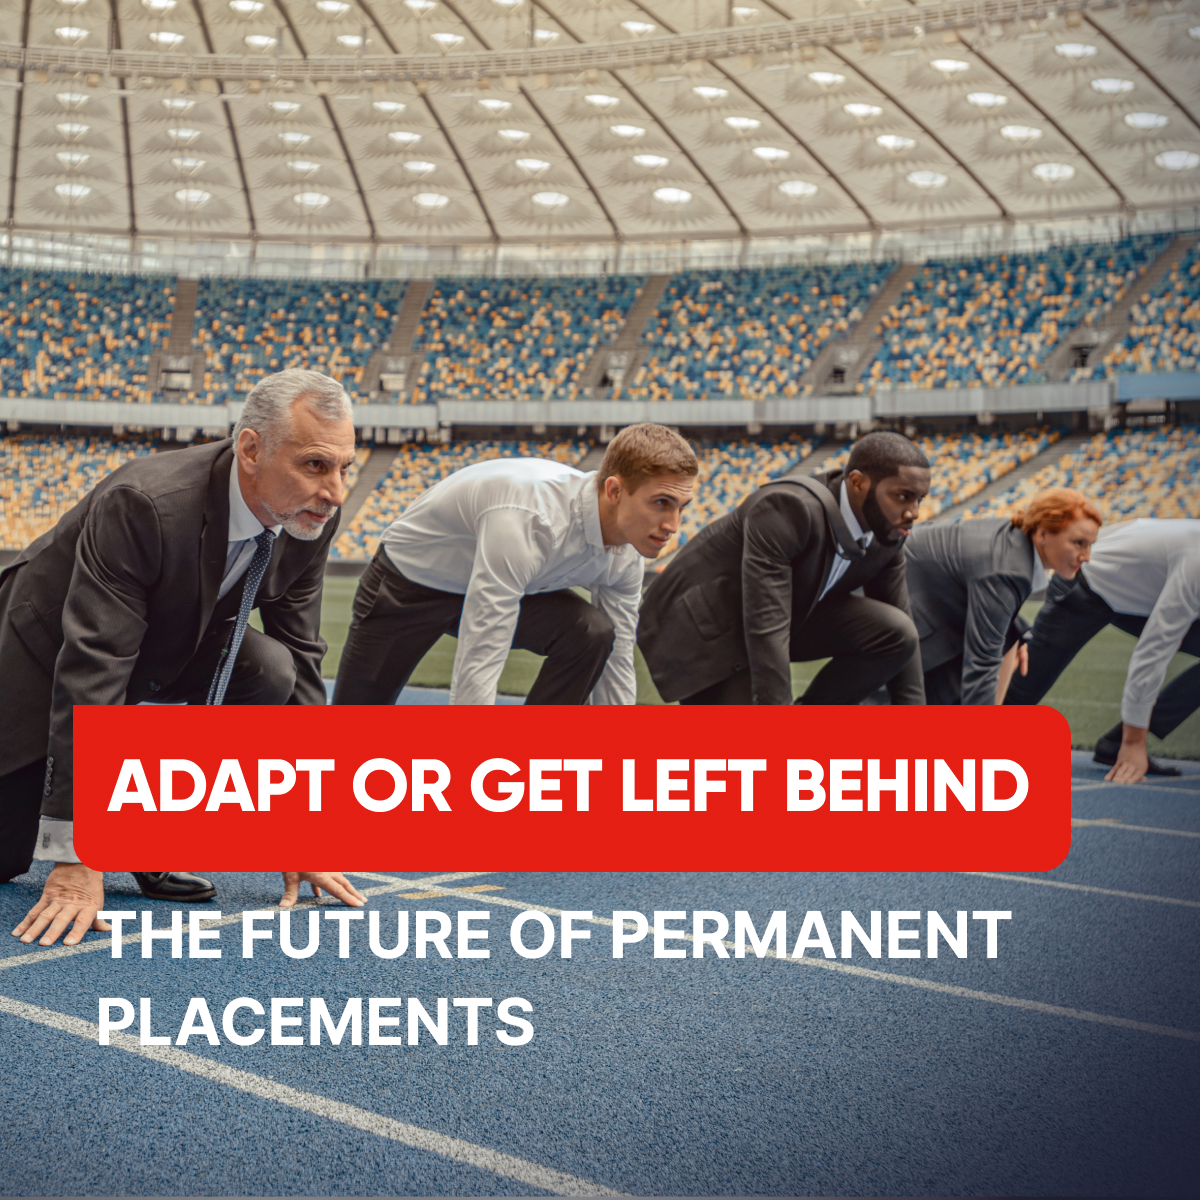 The Future of Permanent Placements